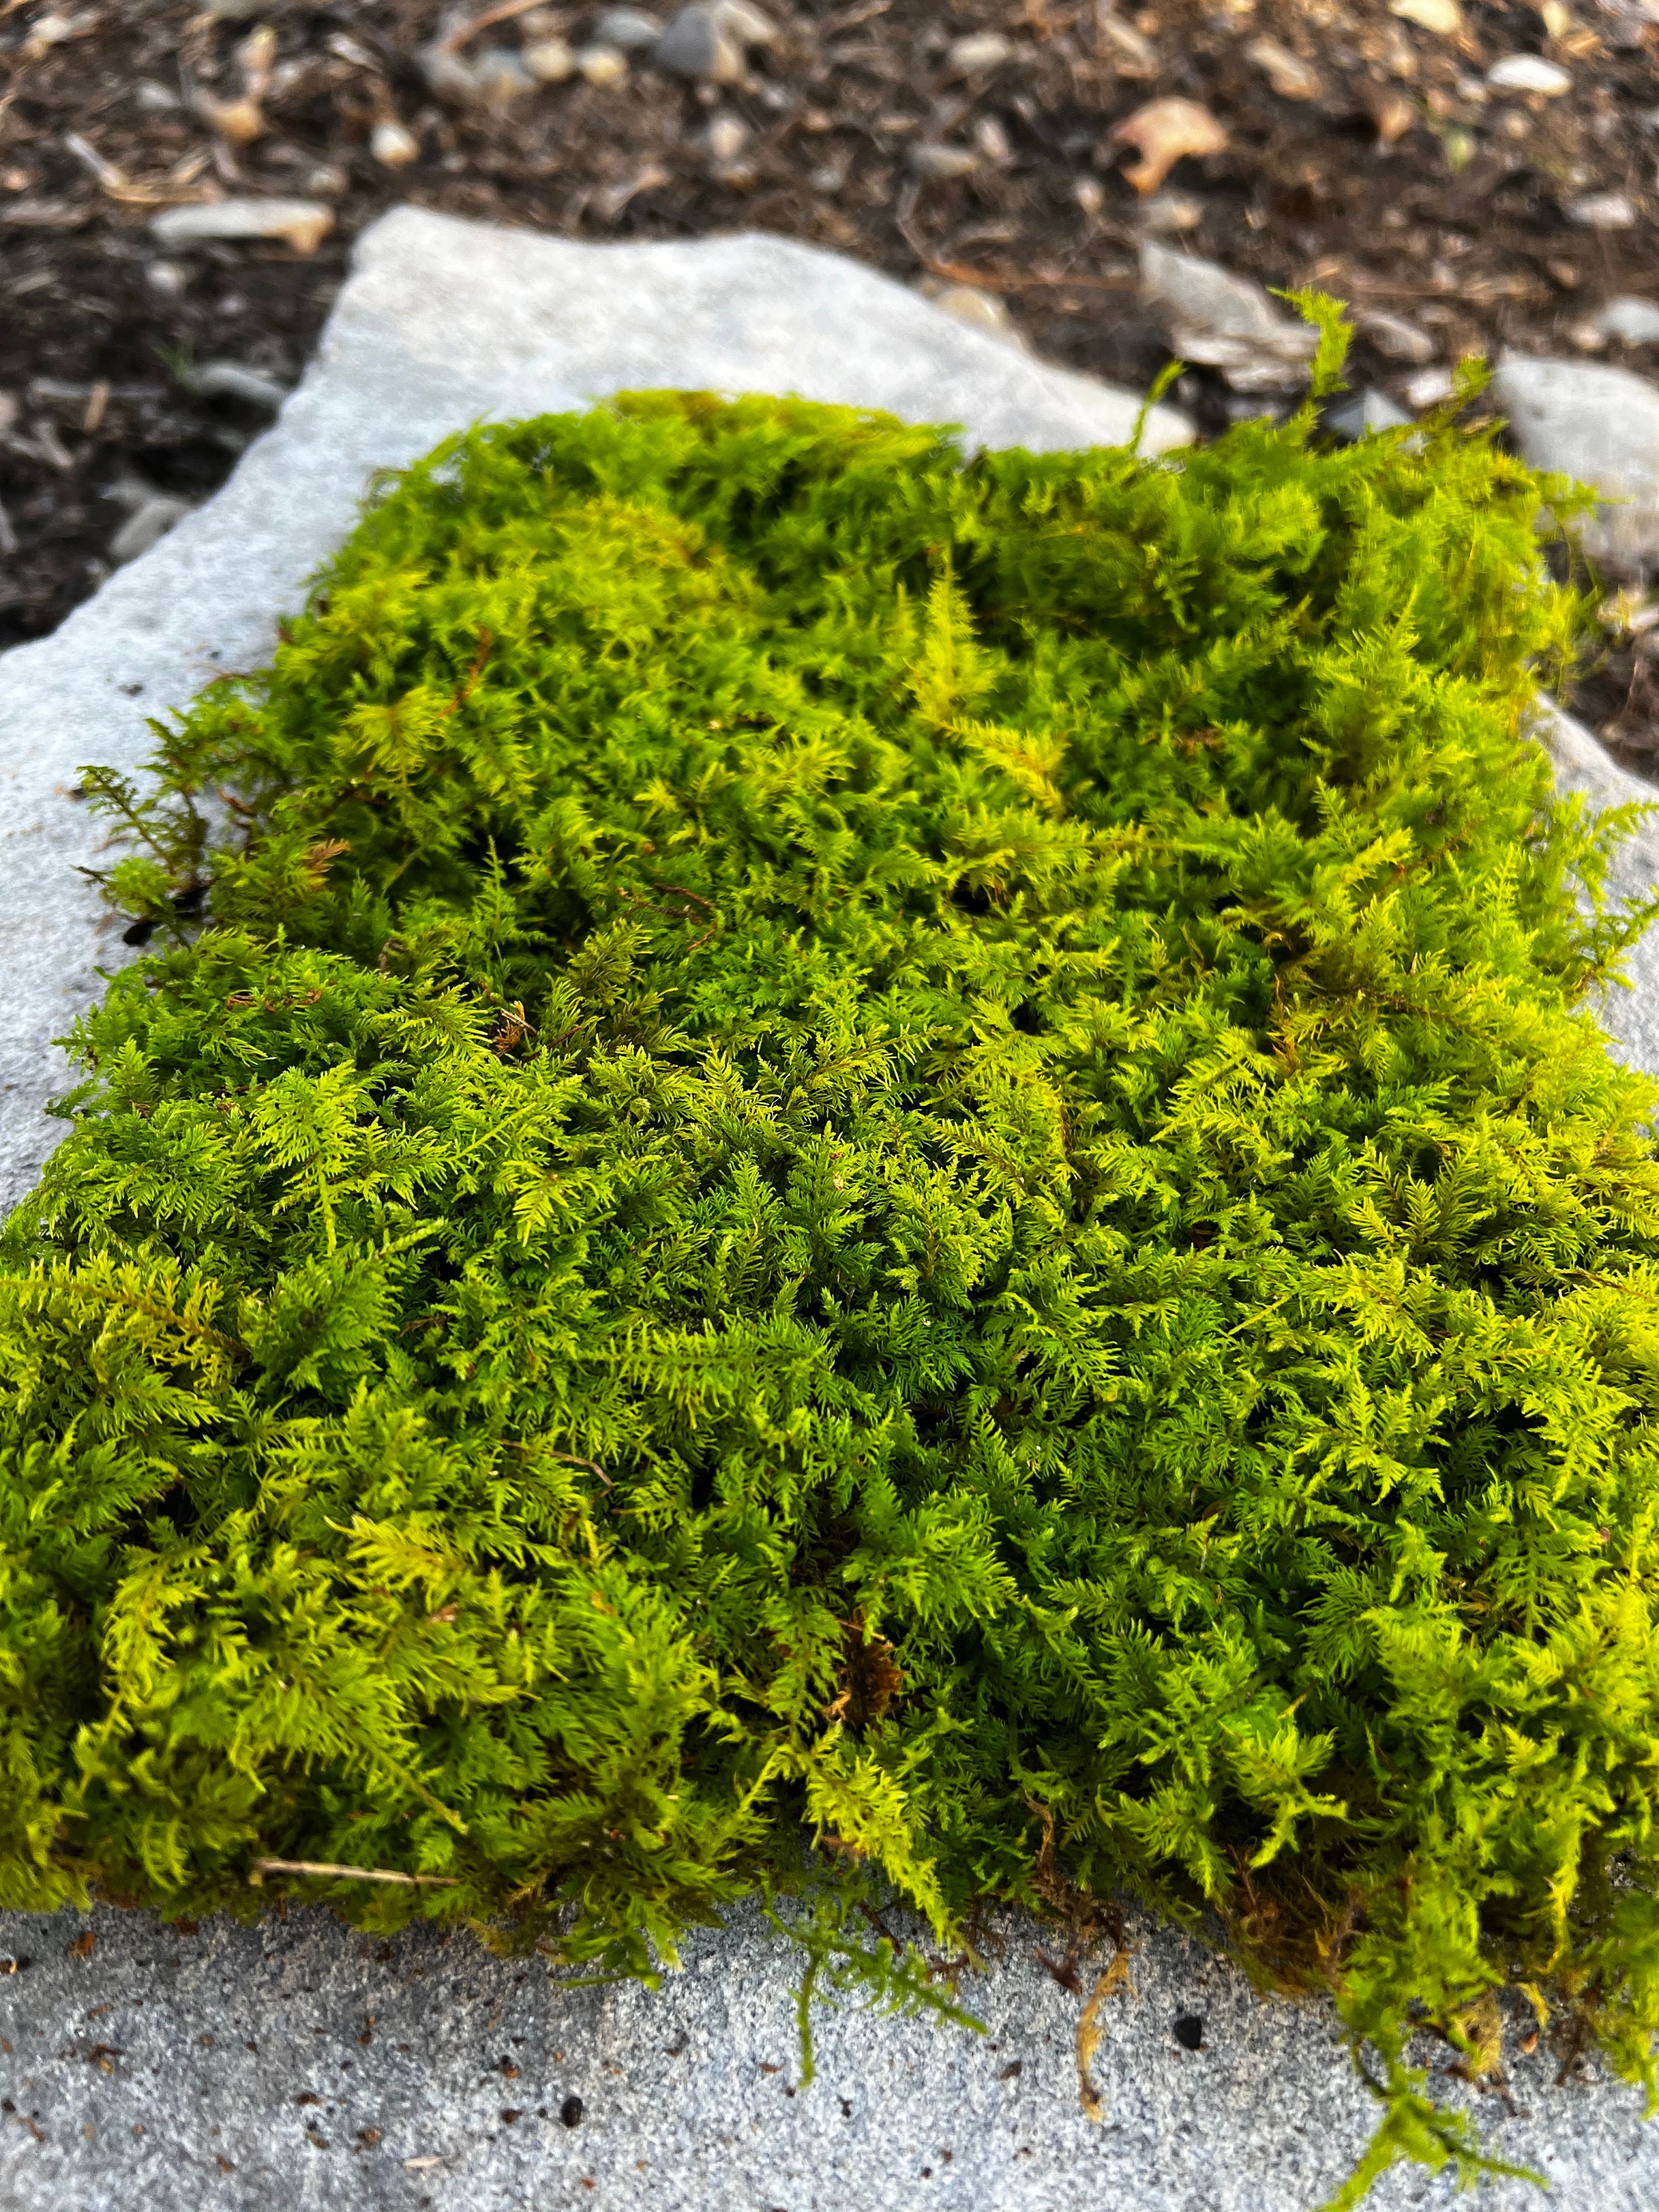 Rock Moss 1 Square Foot Of Fresh Live Rock Moss, Great For Terrariums!